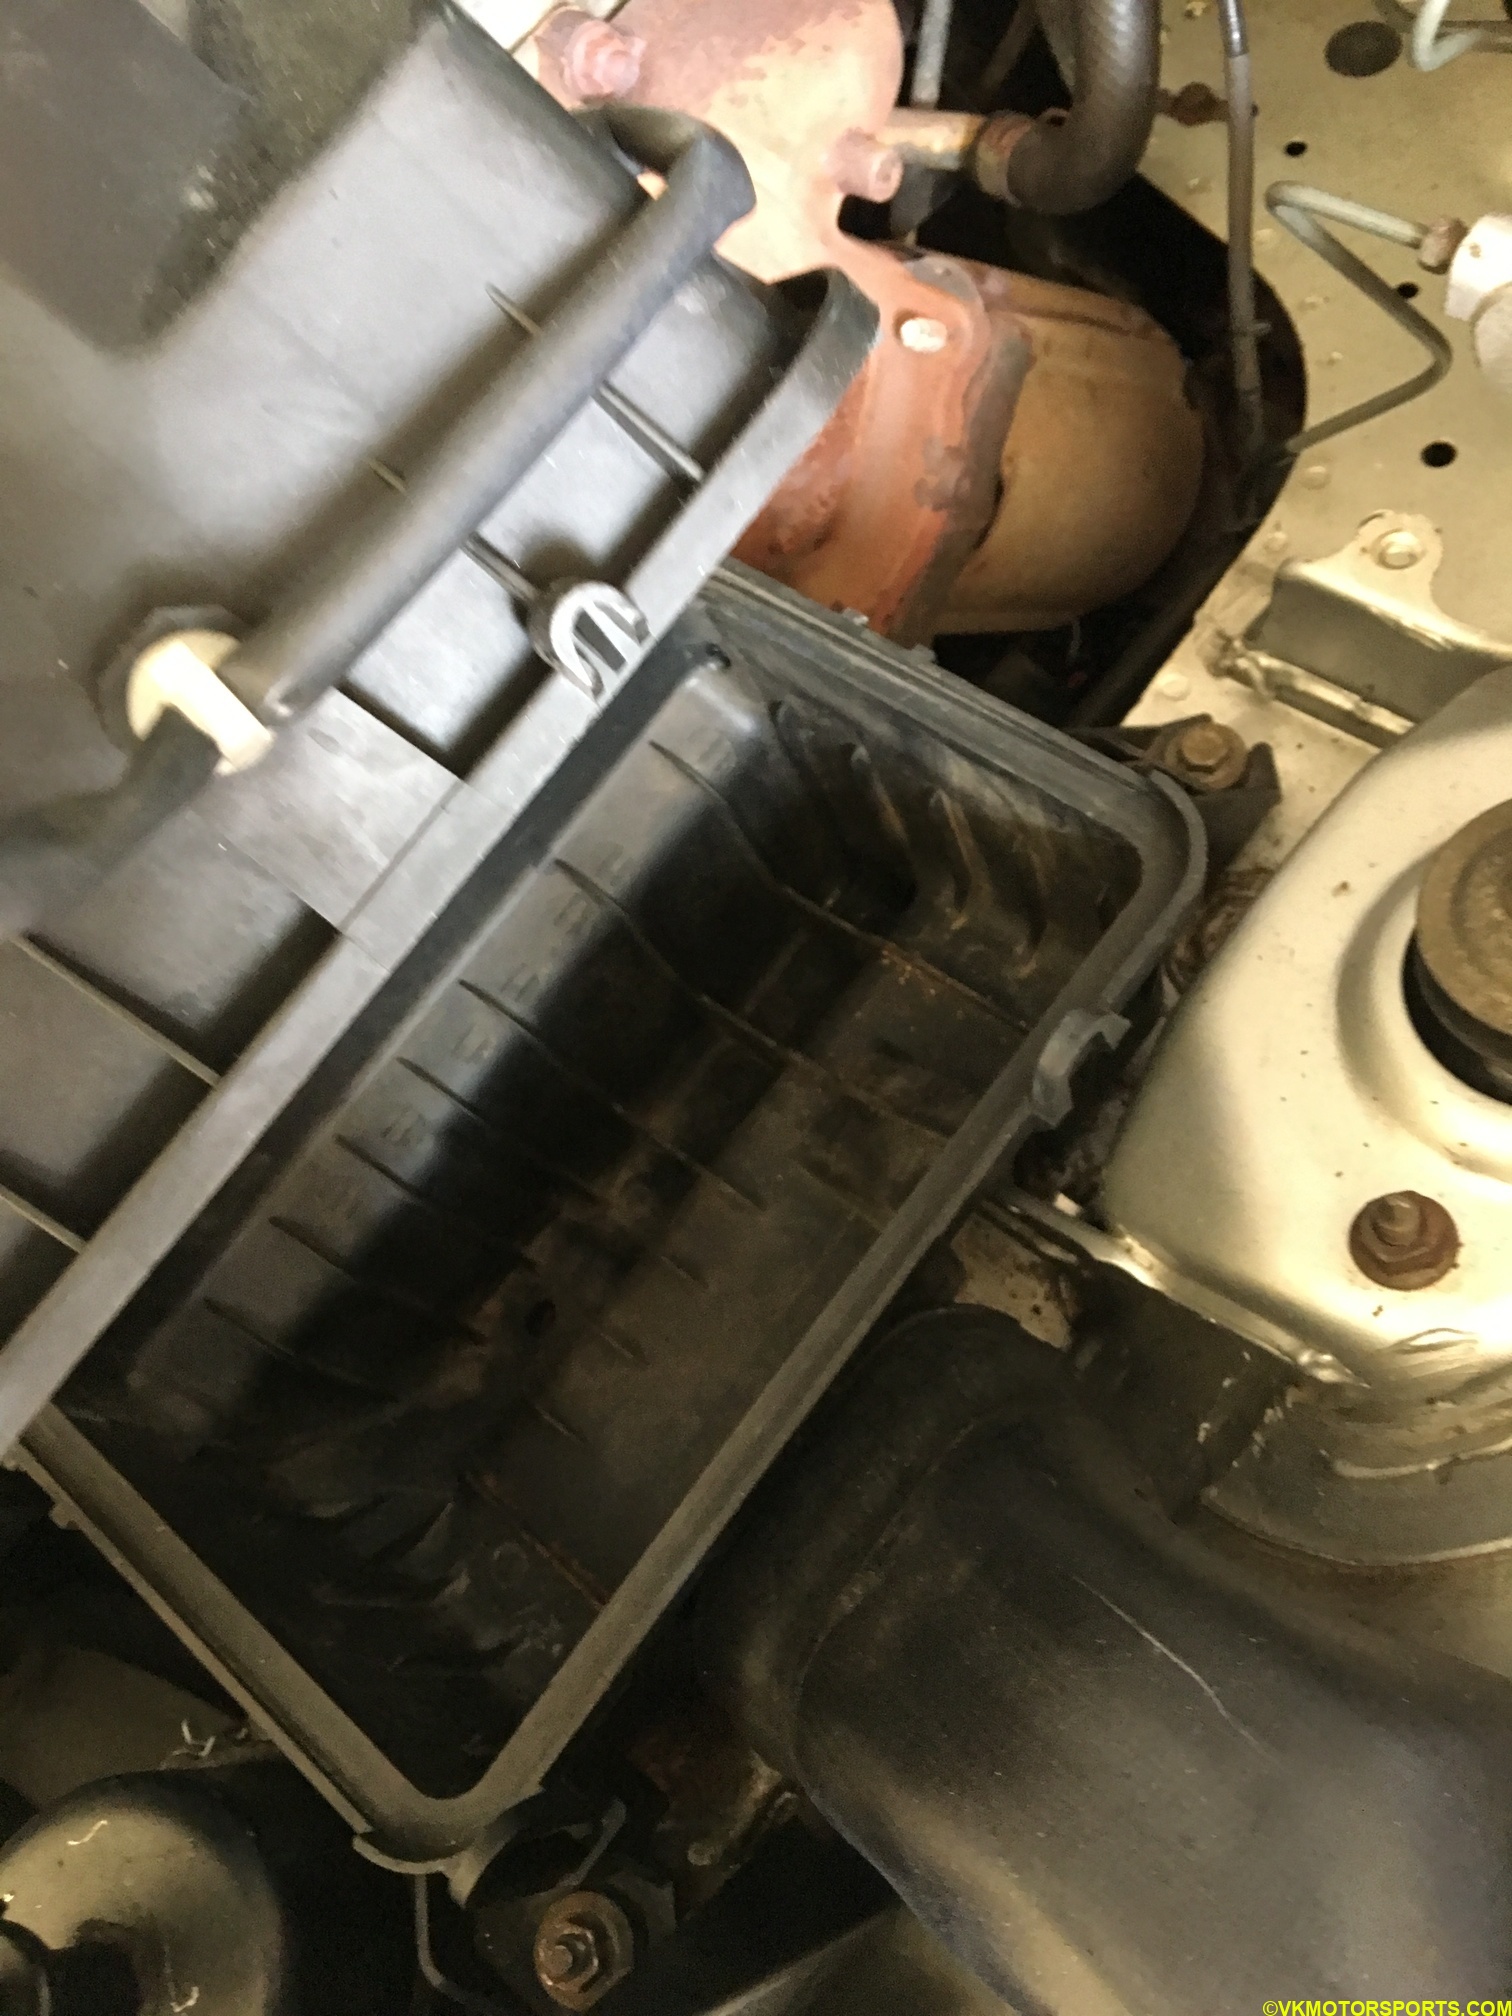 Figure 5. Air Filter removed